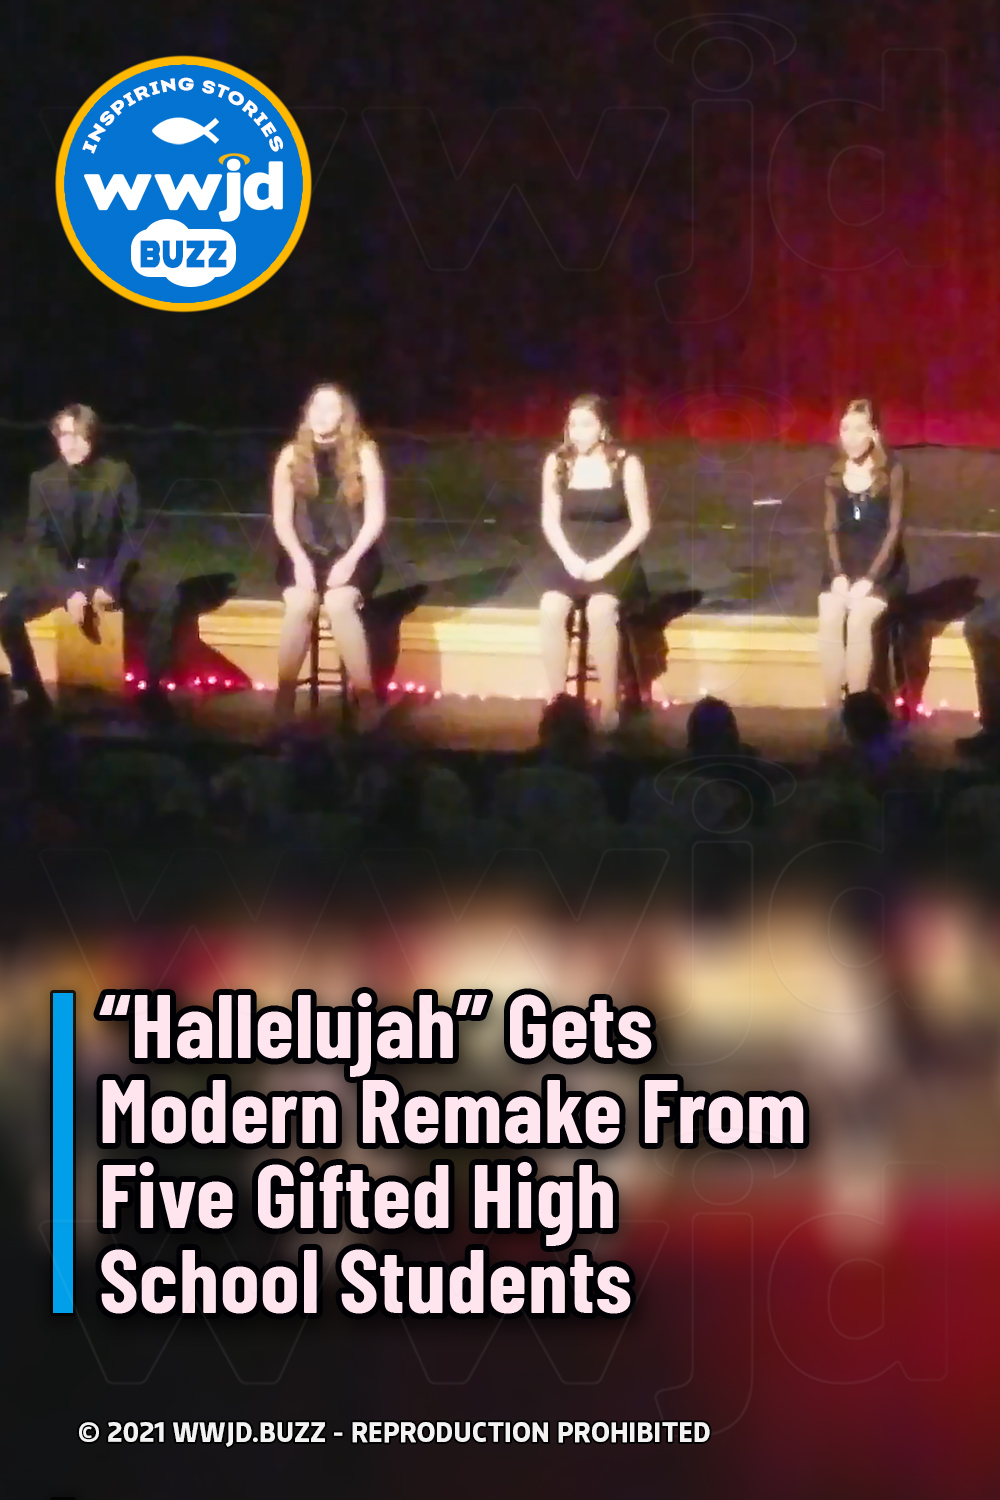 “Hallelujah” Gets Modern Remake From Five Gifted High School Students